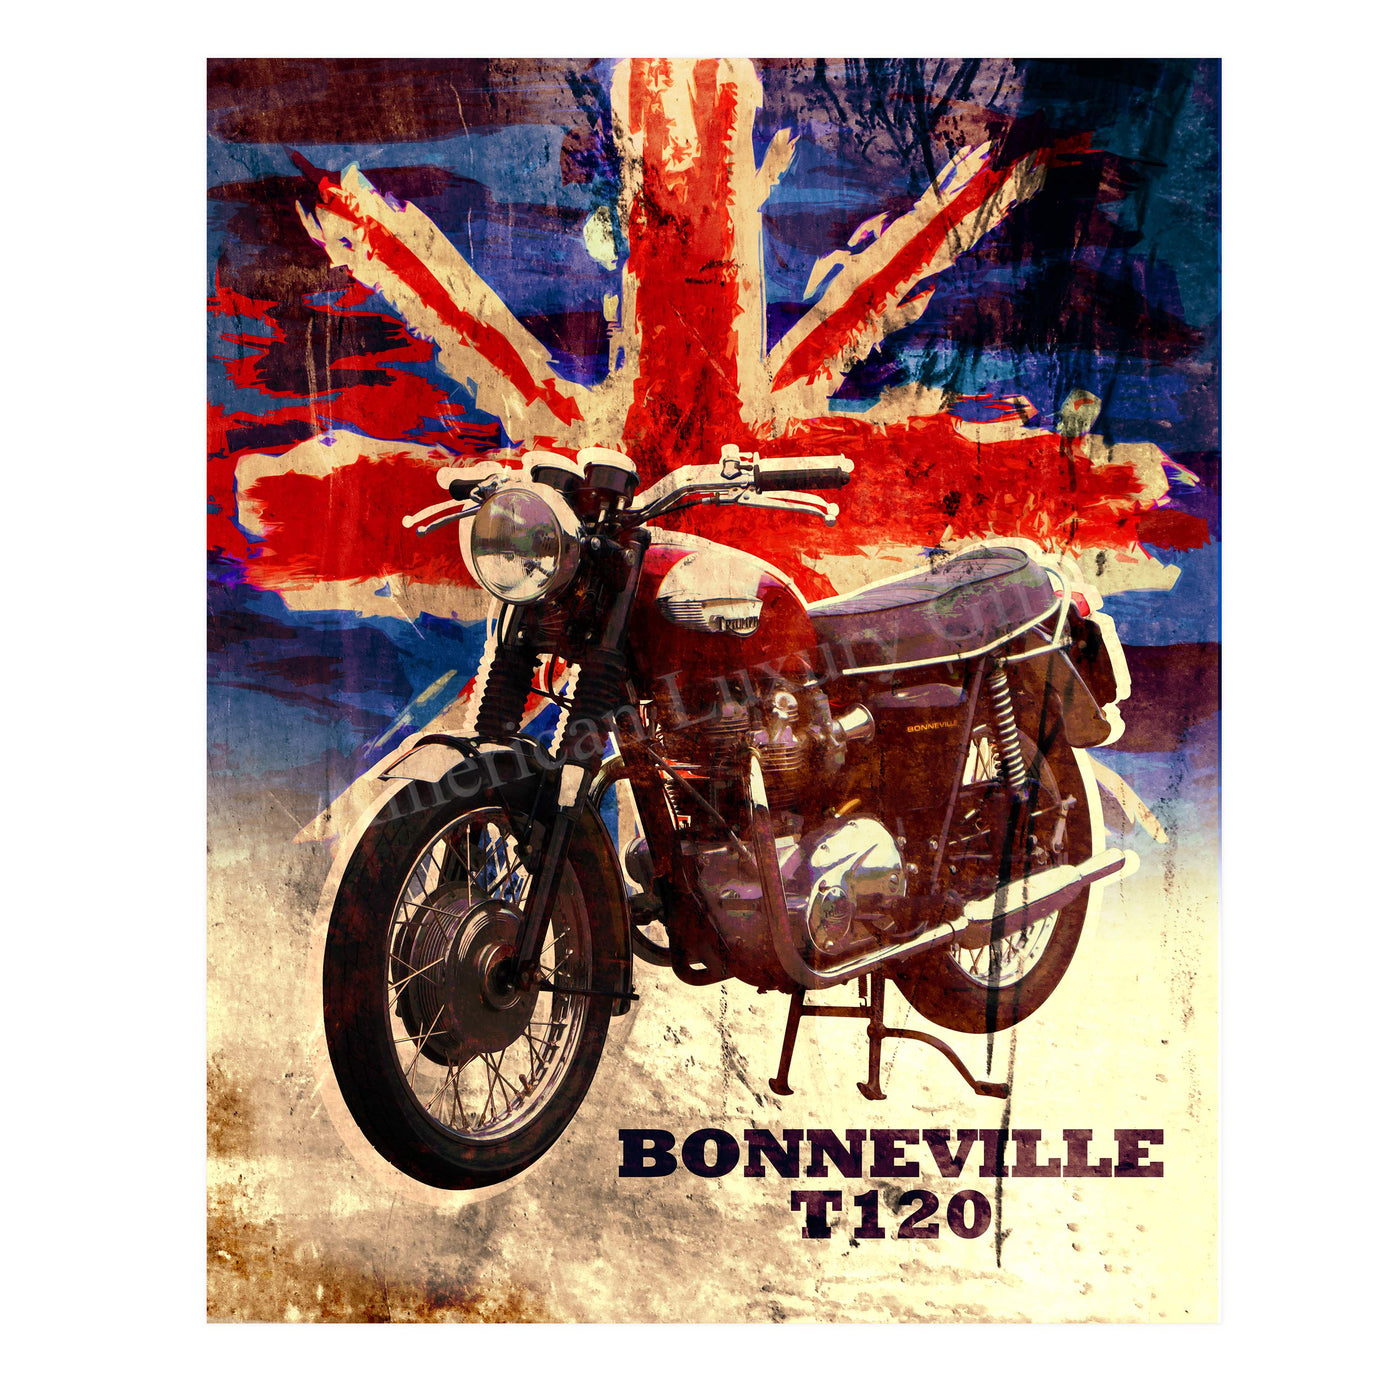 Triumph Bonneville T120 Motorcycle-Vintage Poster Print-11 x14" Retro Wall Decor-Ready to Frame. Home-Office-Bar-Cave Decor. Perfect Sign for the Garage-Shop. Great Motorcycle-Automotive Gift!